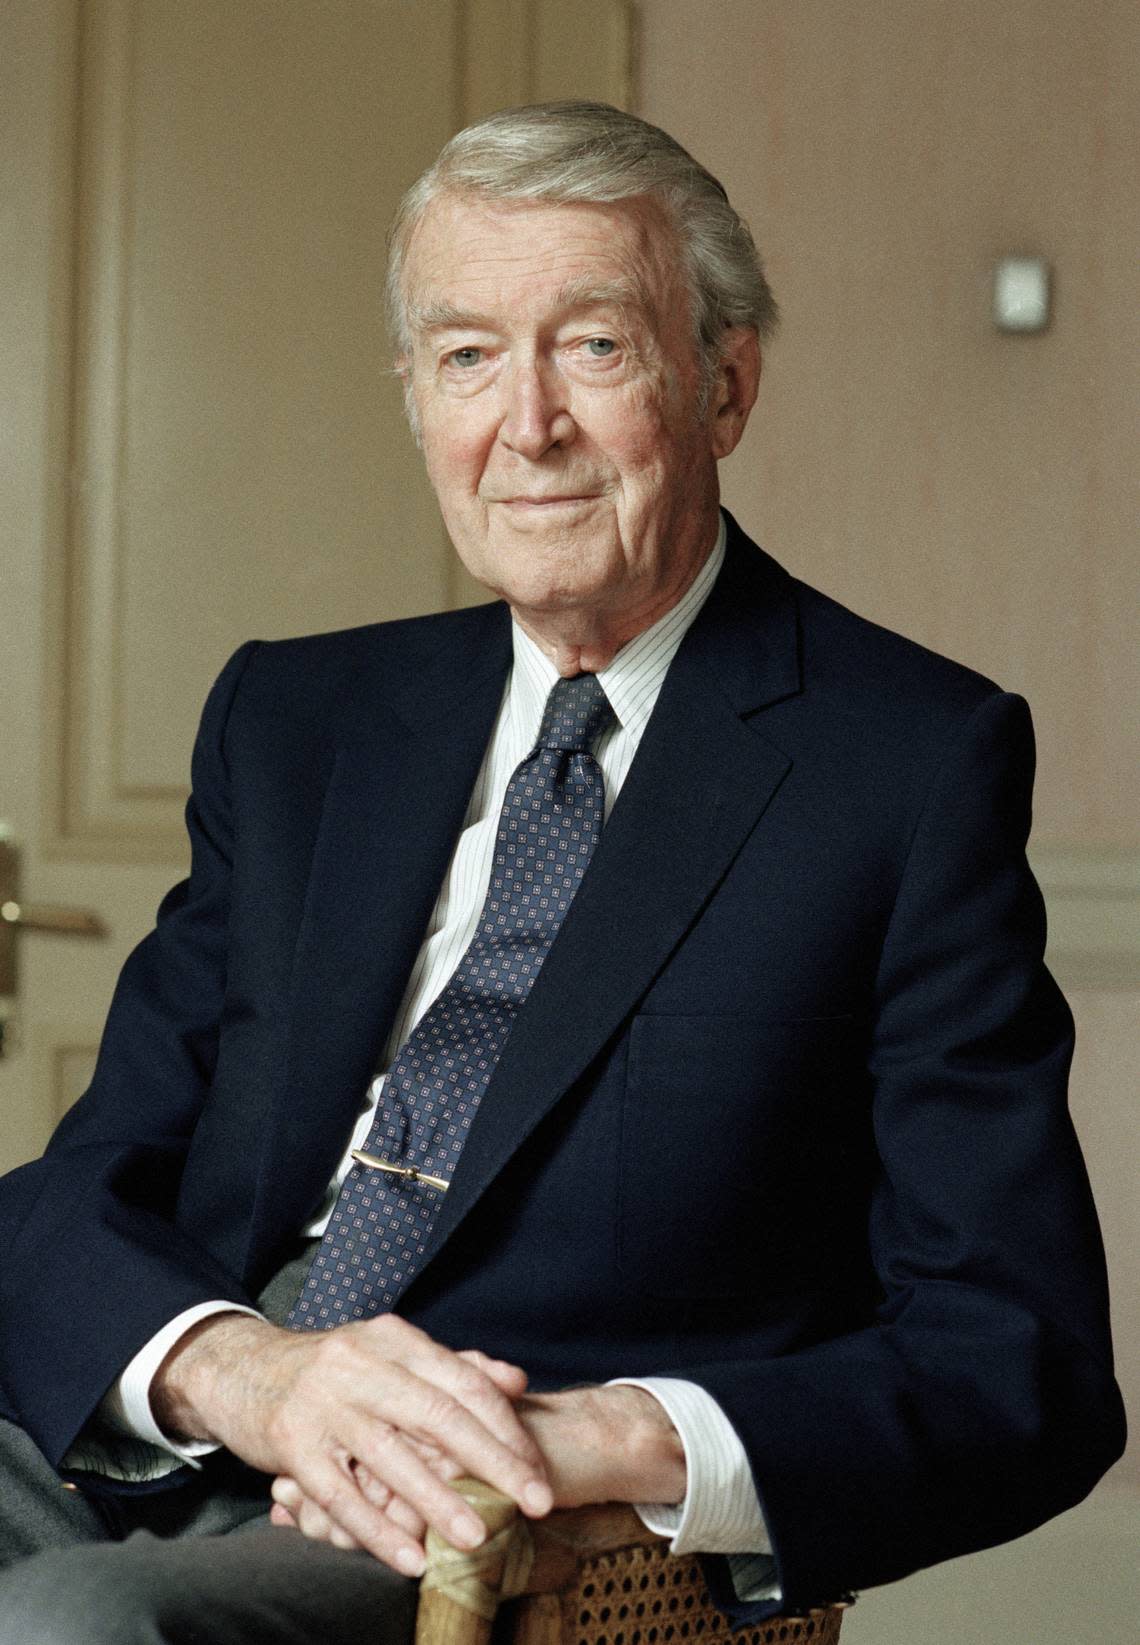 Jimmy Stewart poses for a photo in Los Angeles, July 12, 1990.